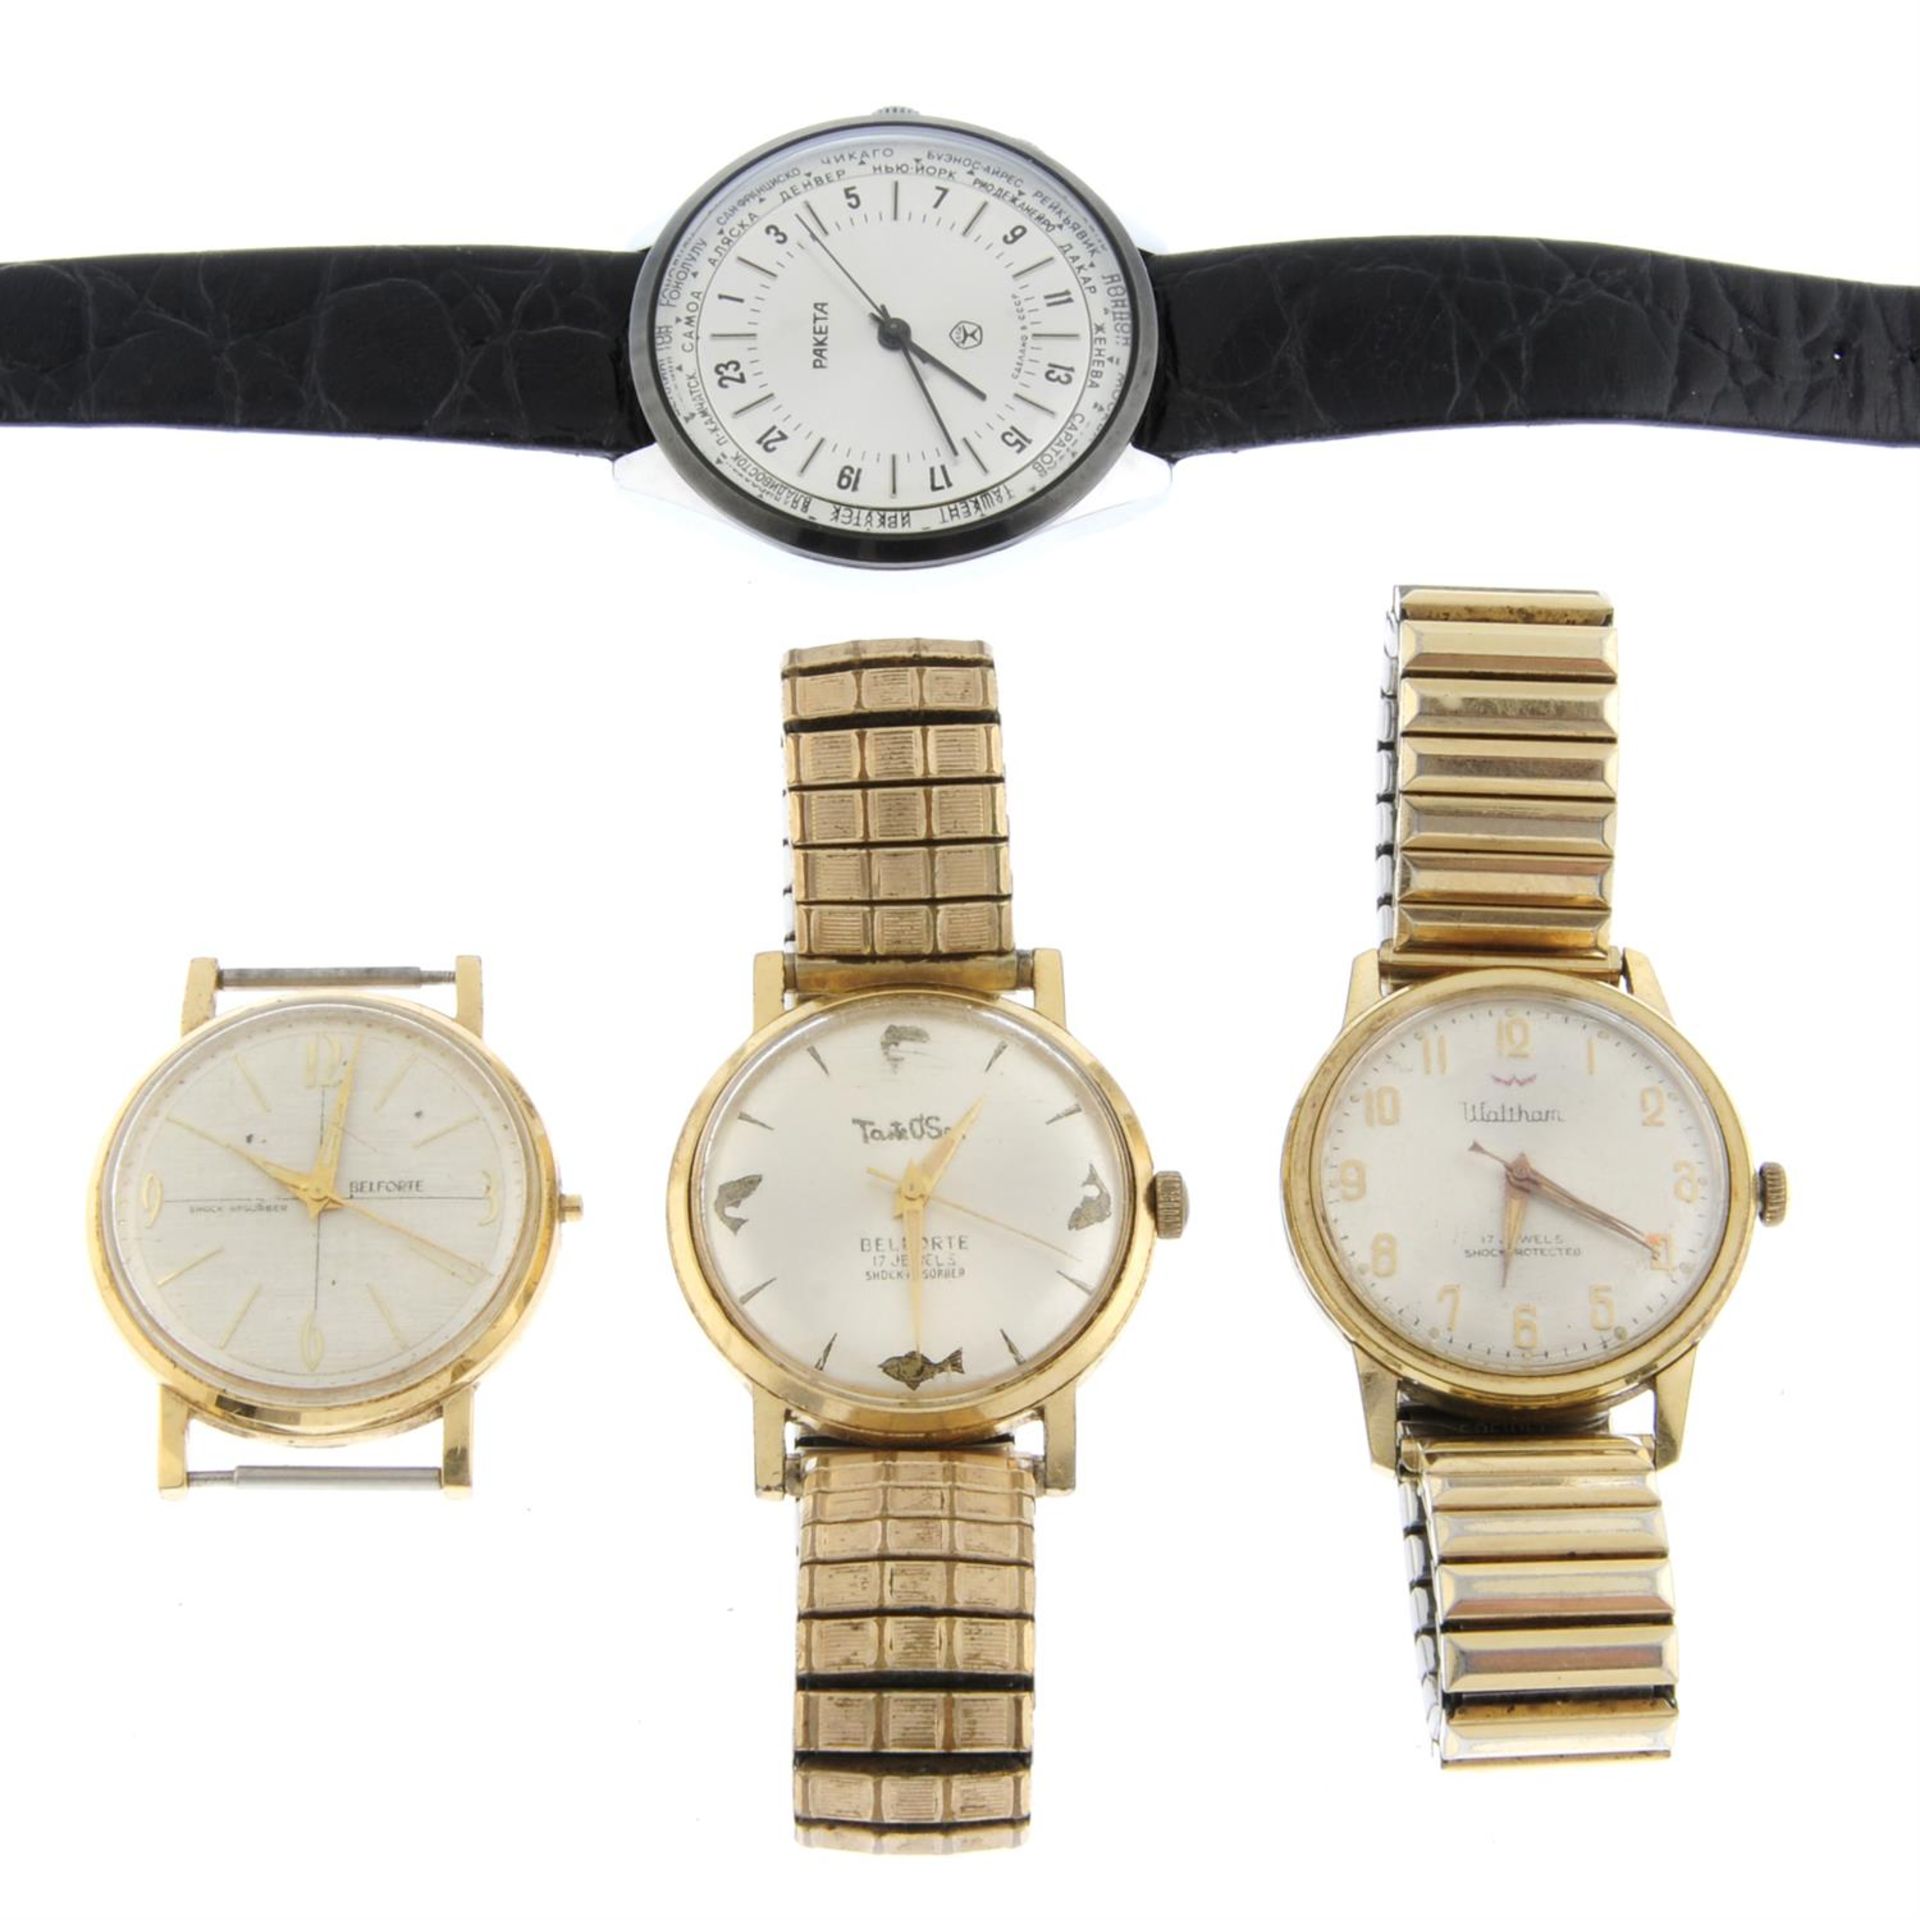 A group of four assorted watches, to include examples by Waltham and Belforte.